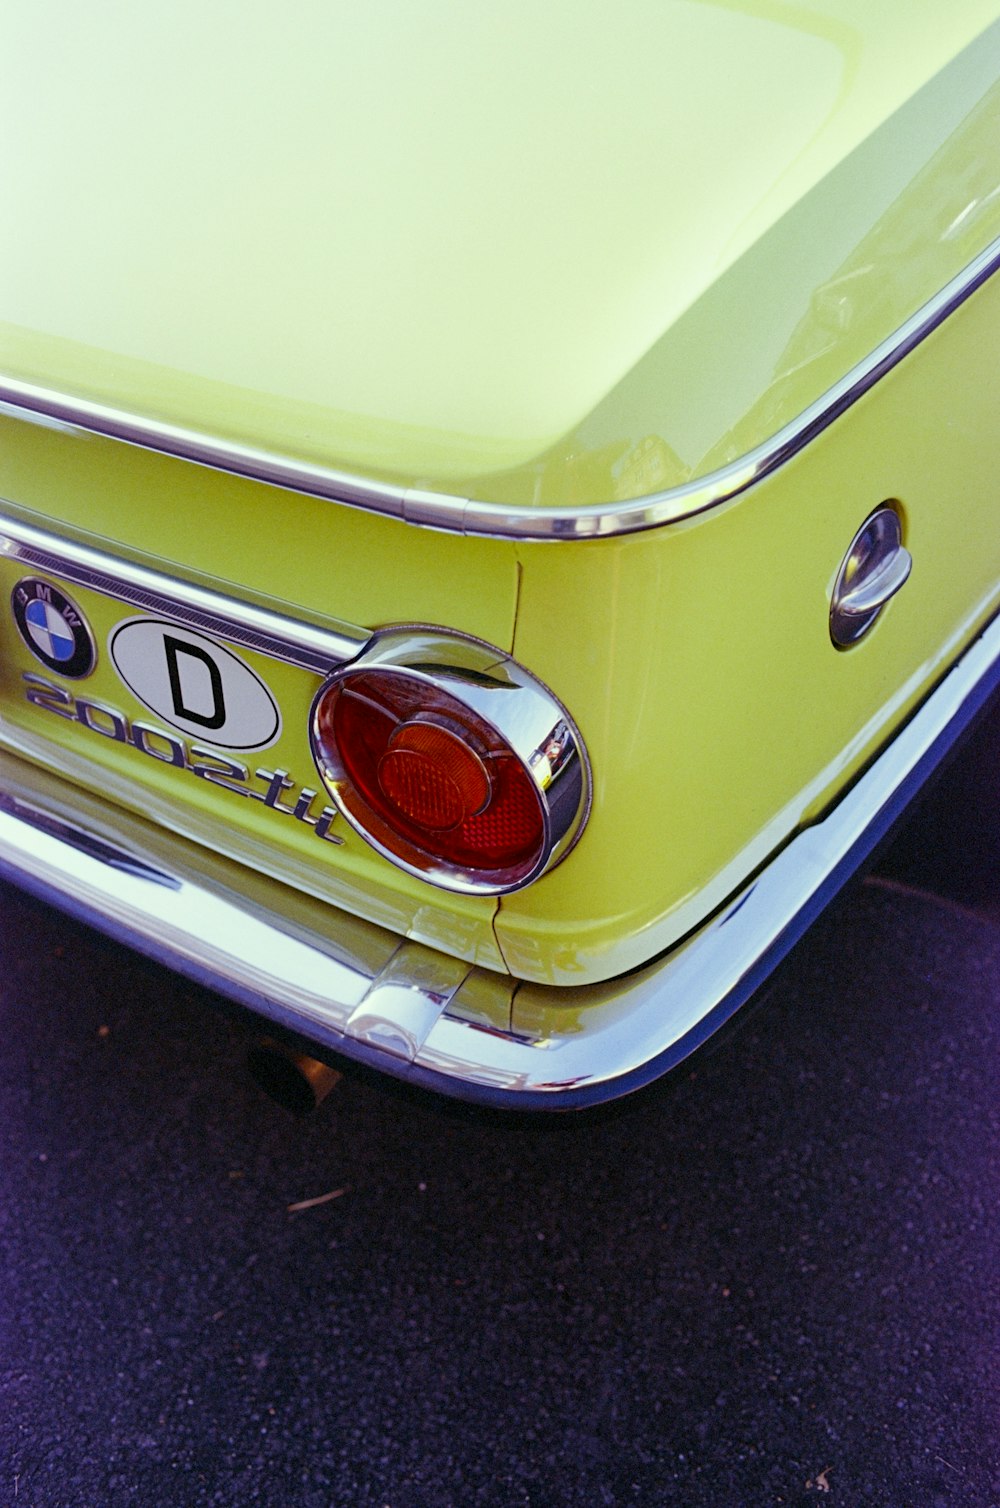 a close up of the tail end of a yellow car